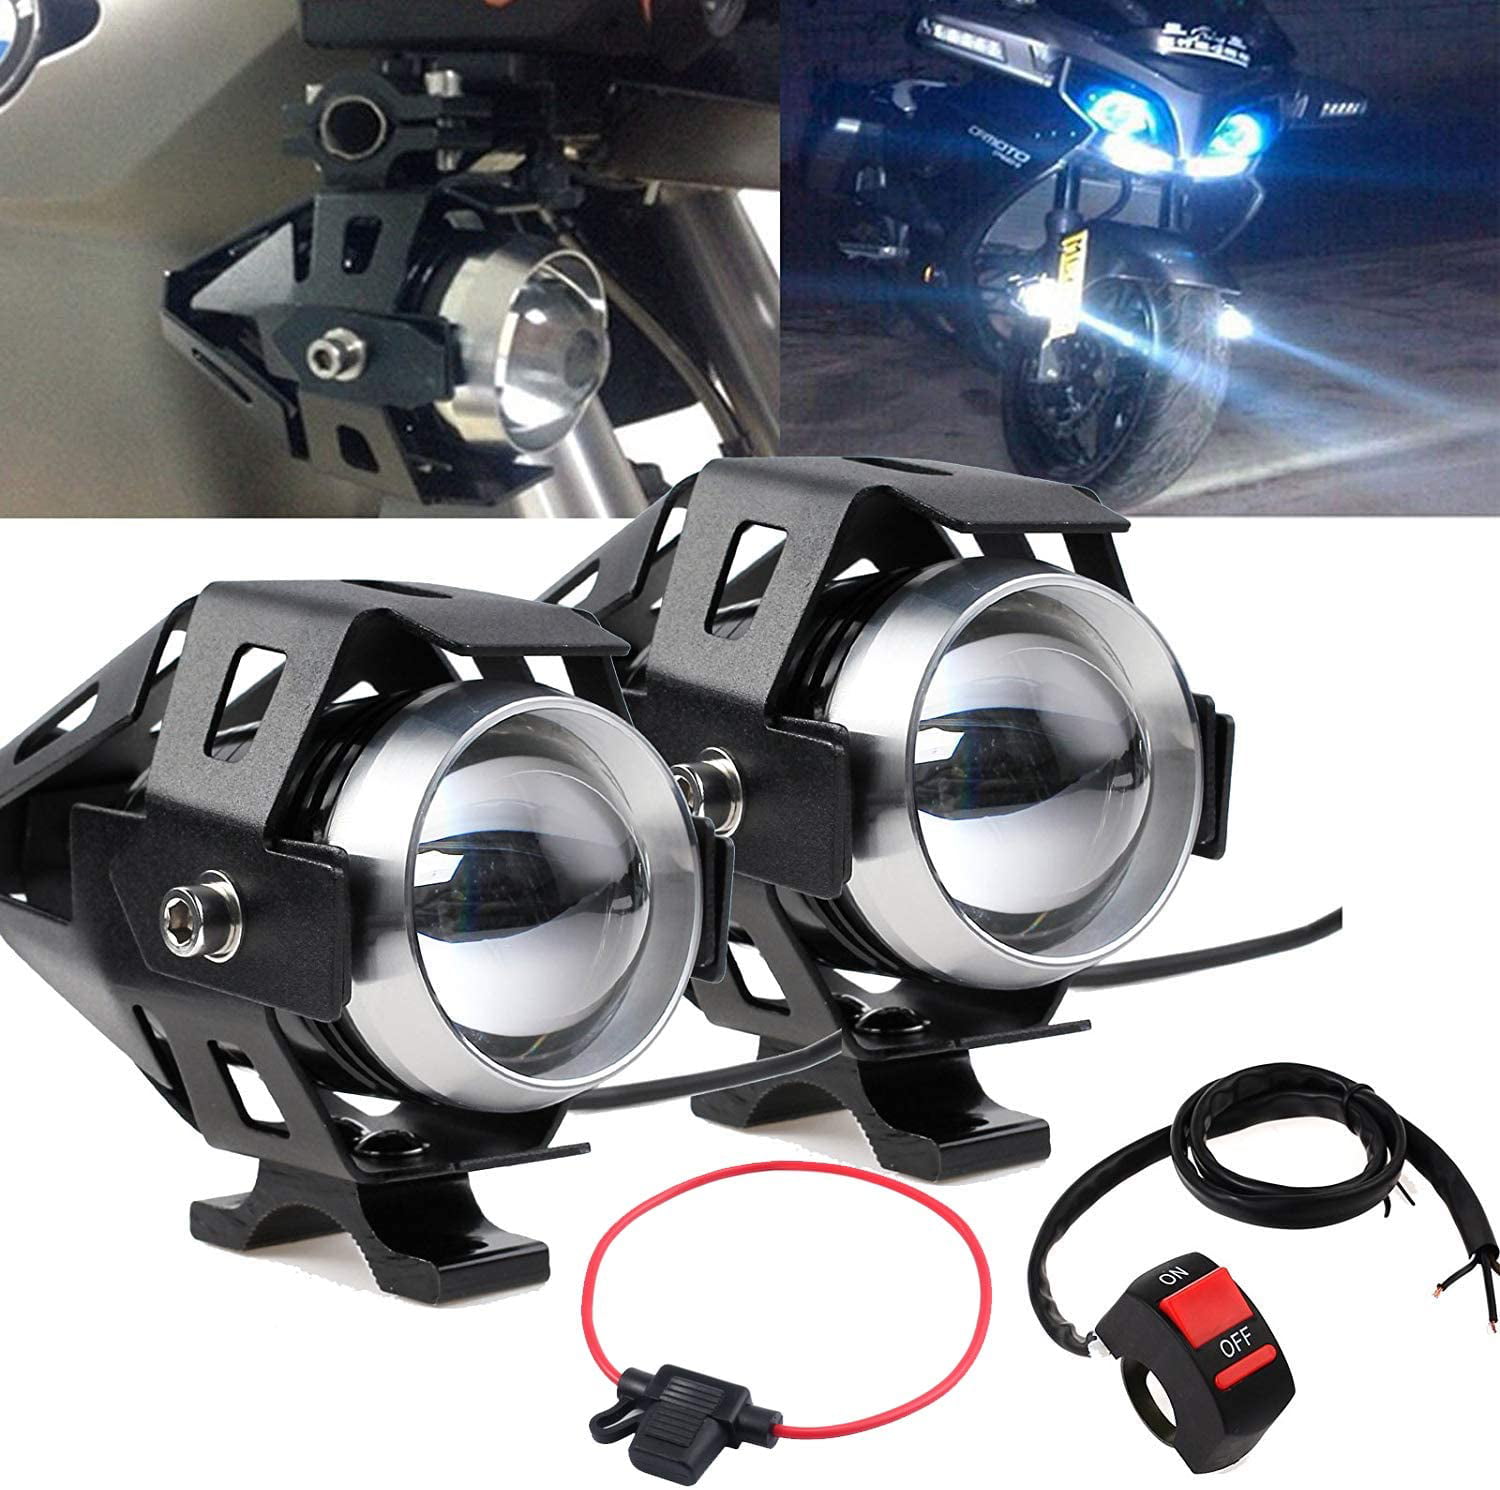 Motorcycle Headlights,Biqing Motorbike Spot Driving Lights CREE U5 Motorcycle Front Spotlights Additional Fog Lights DRL 125W 3000LM with Switch for Motorcycle Quad Scooter Car Truck Boat Bike White 